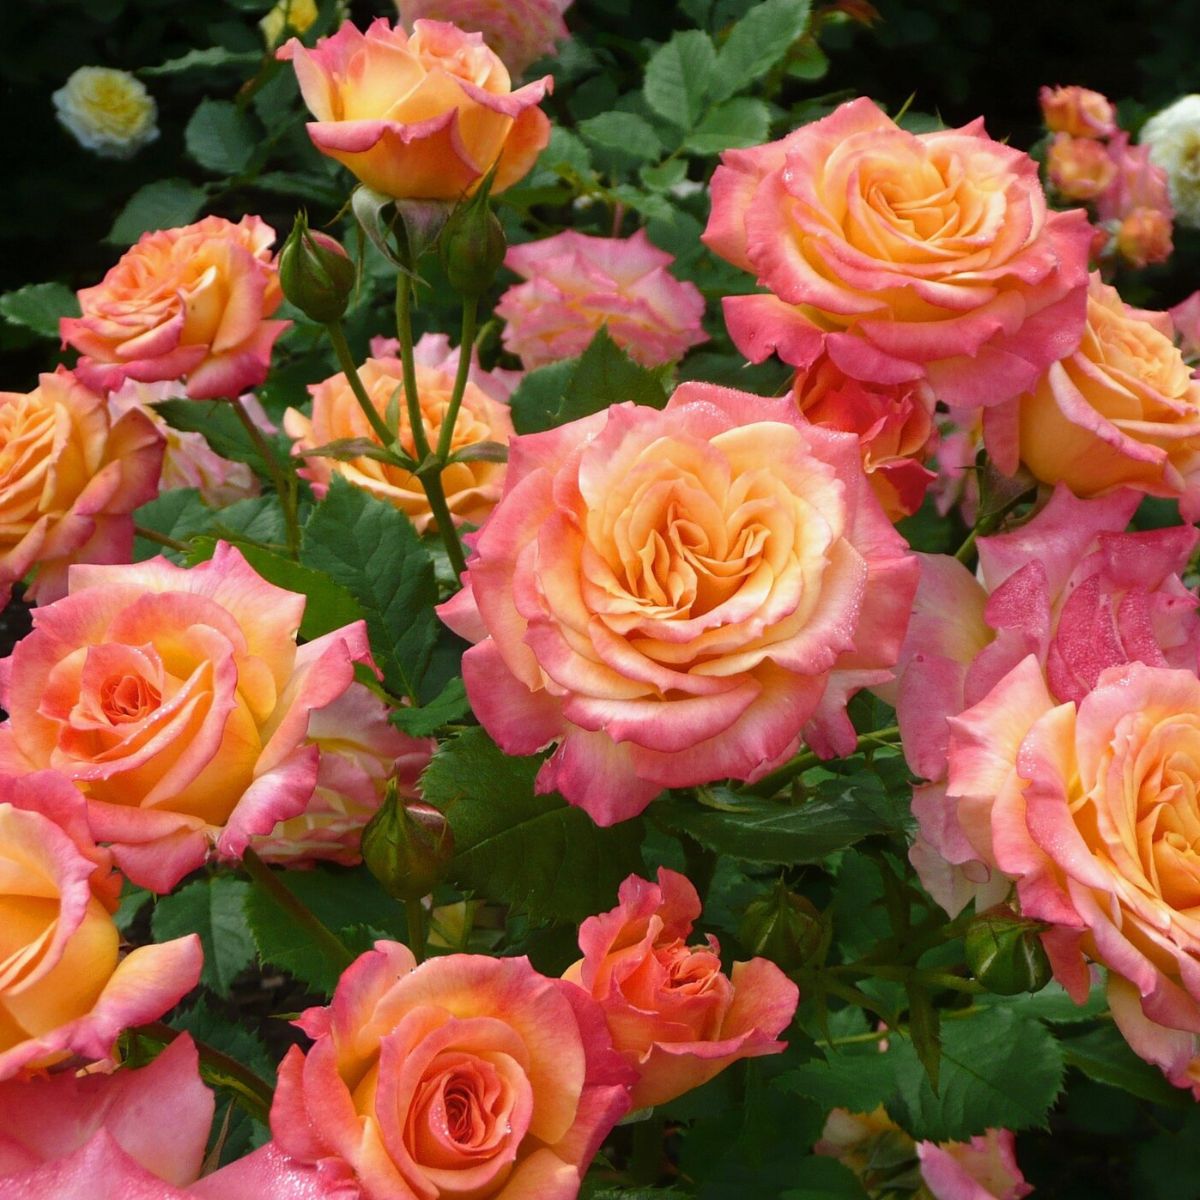 Seven mistakes preventing your roses from blooming on Thursd